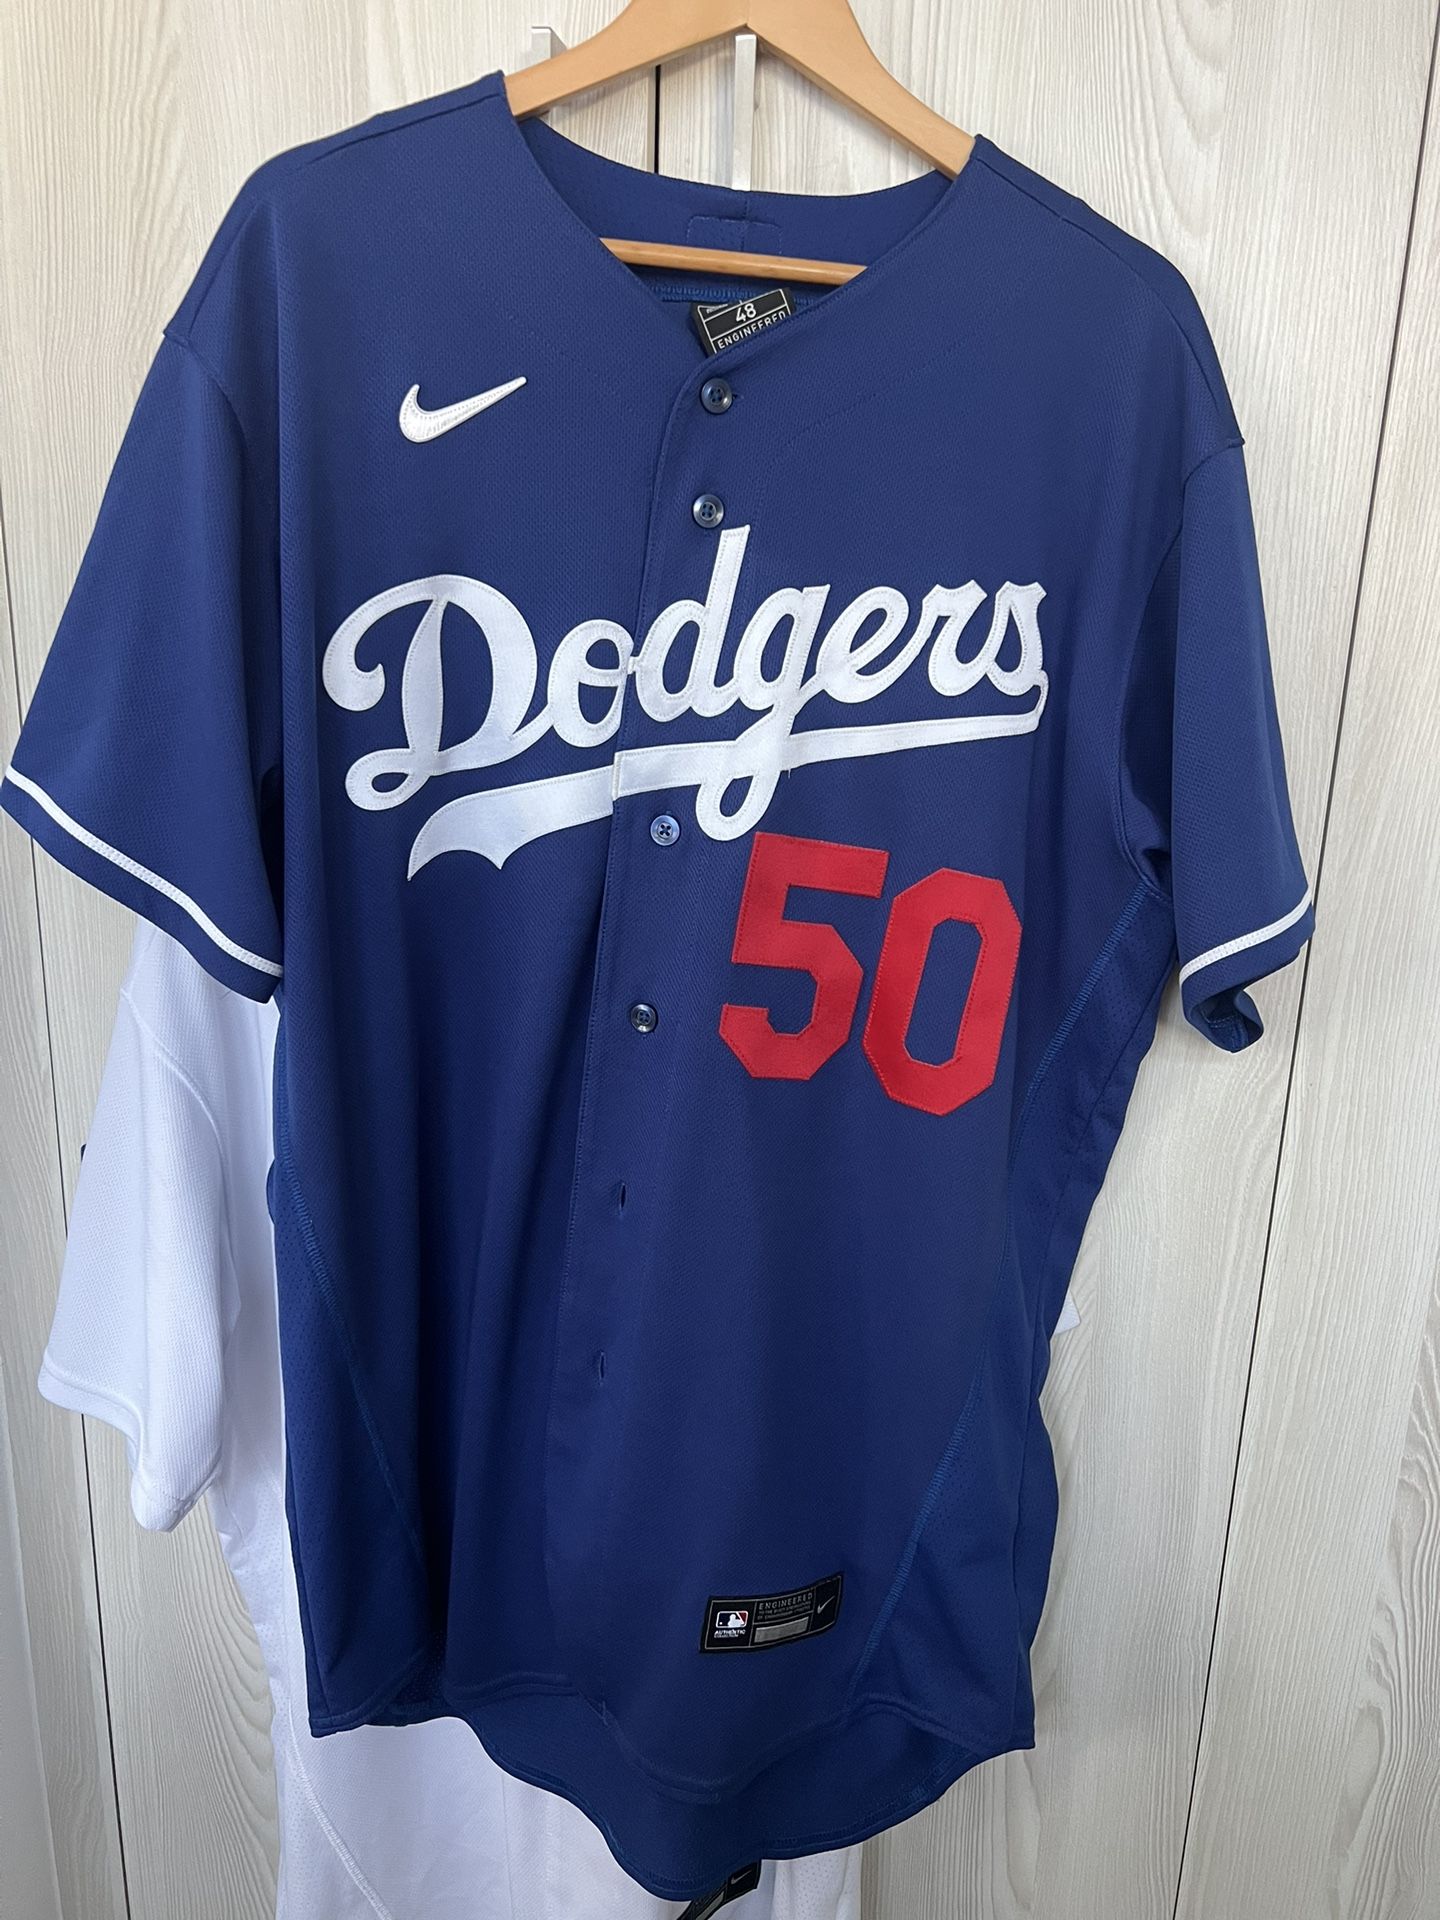 Los Angeles Dodgers, Mookie Betts Jersey for Sale in Los Angeles